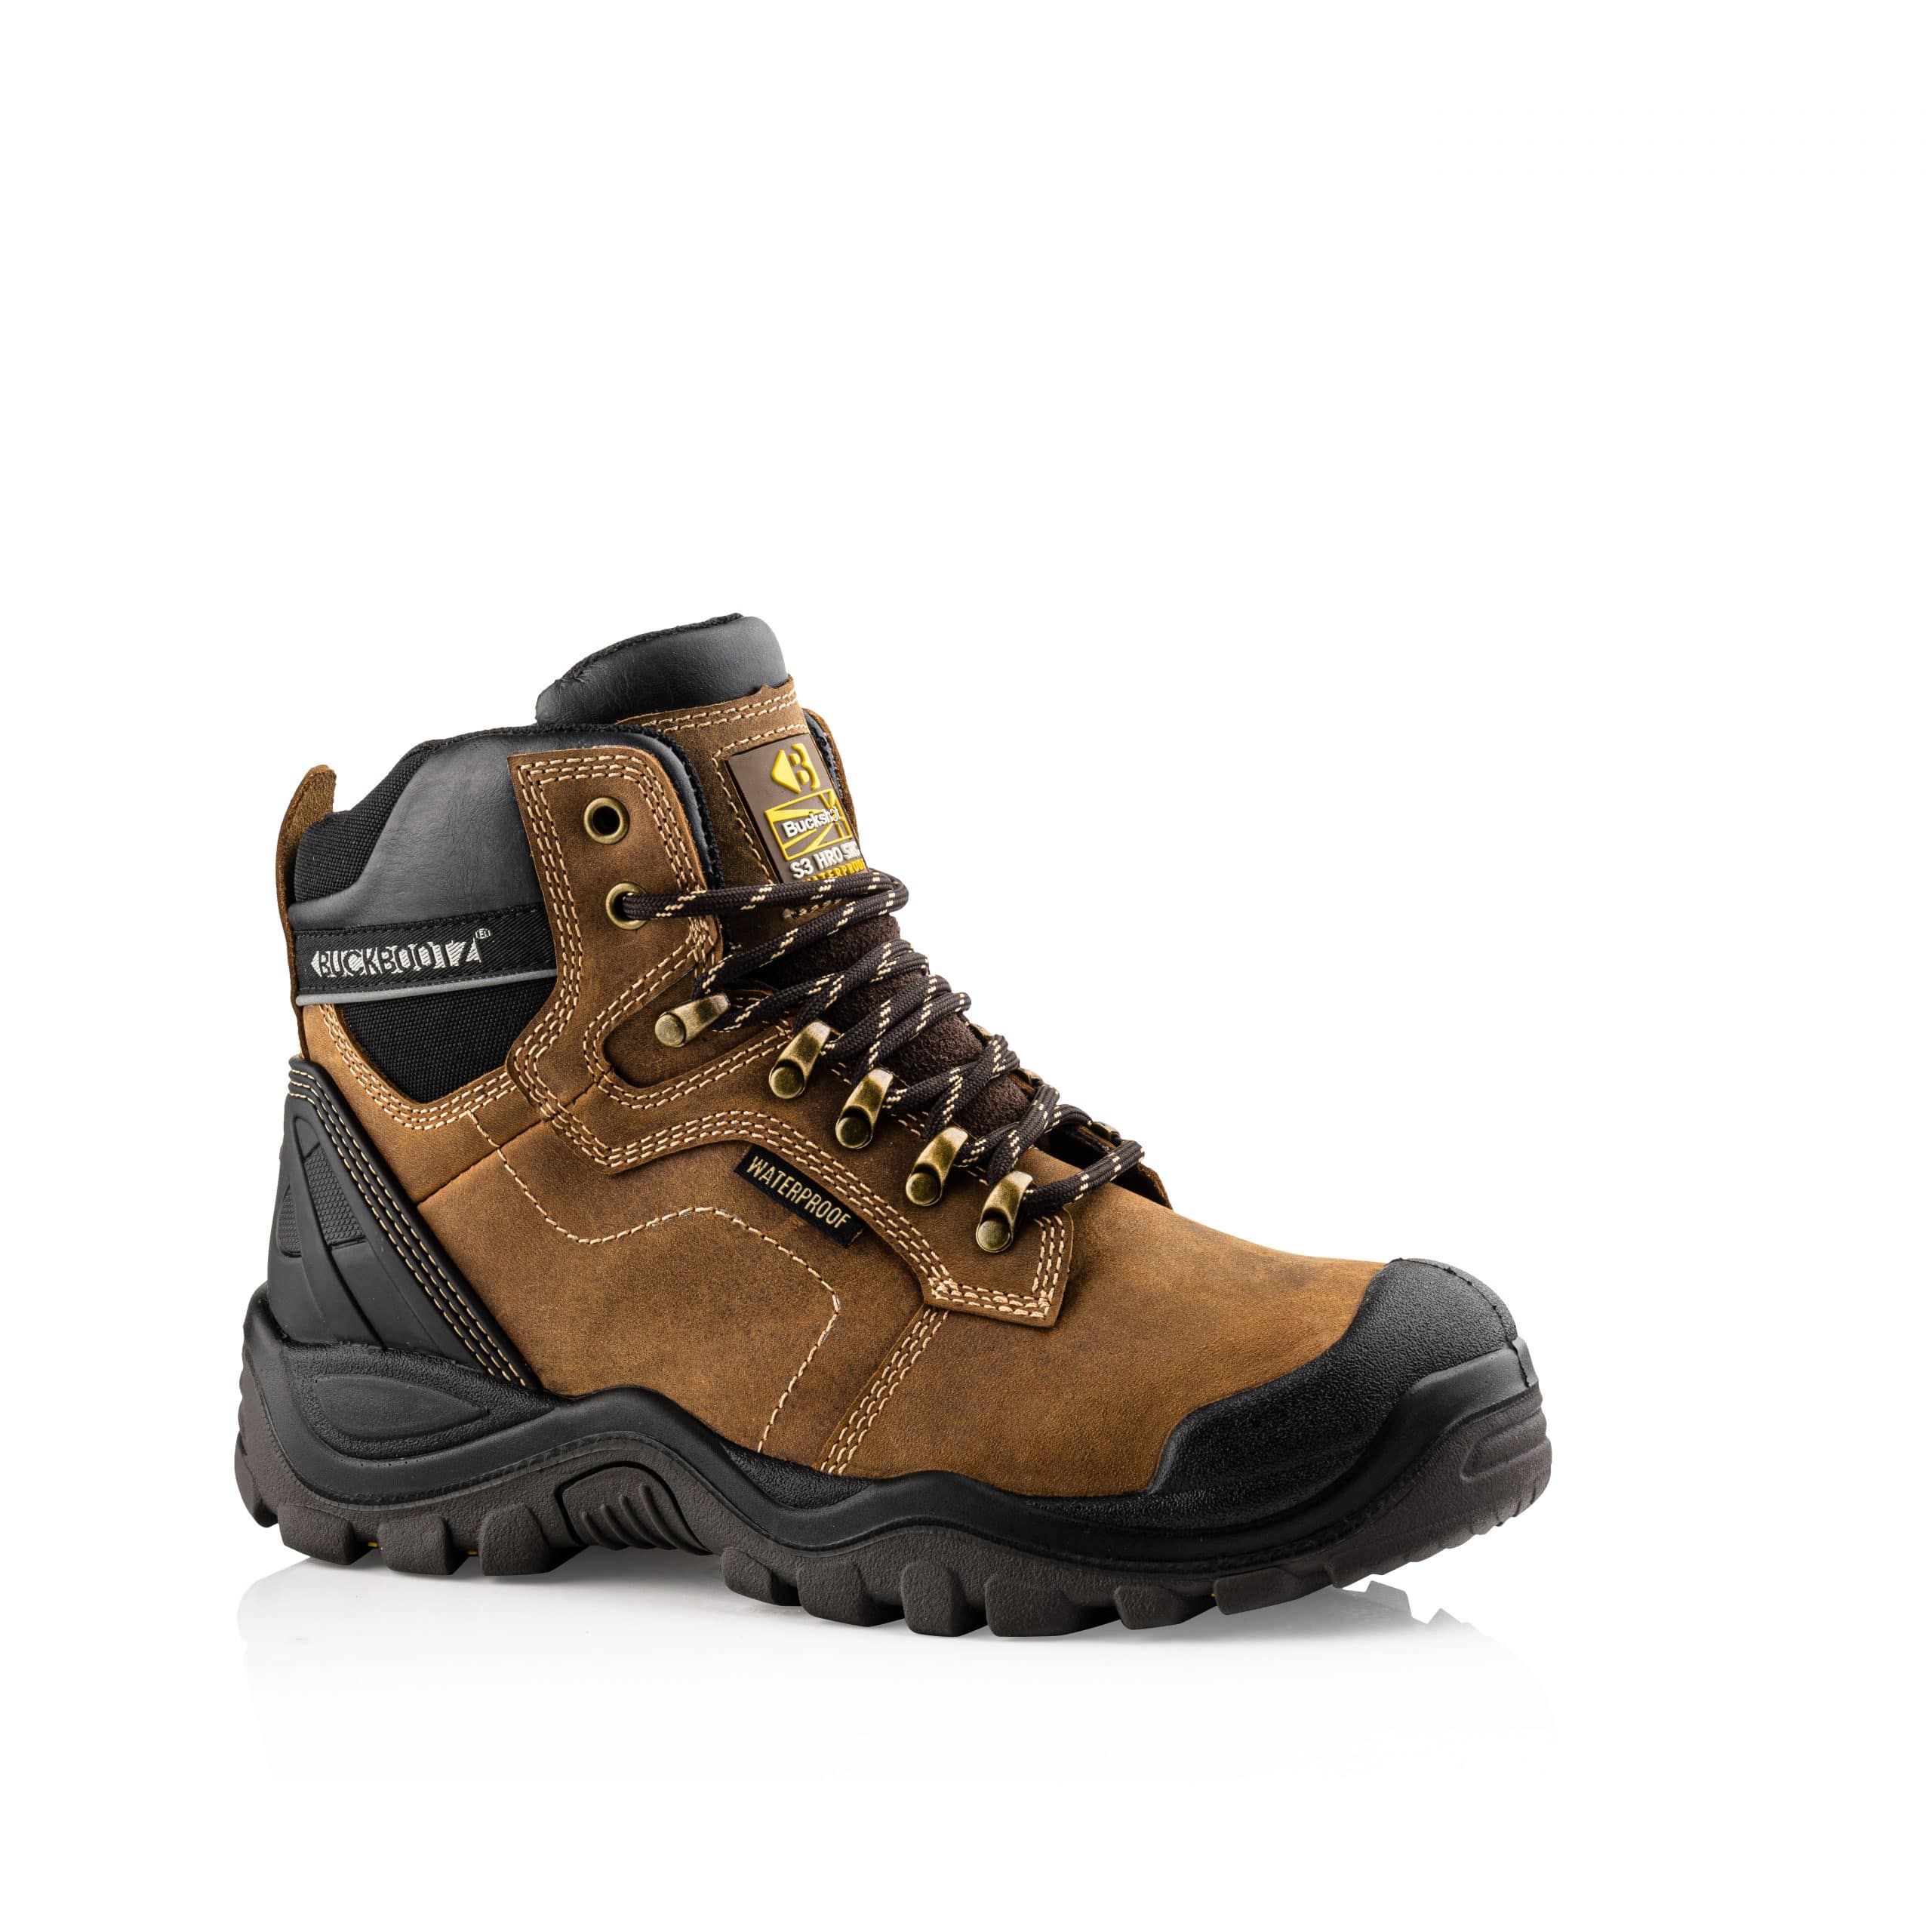 Buckler Hiker Style Waterproof Safety Boots